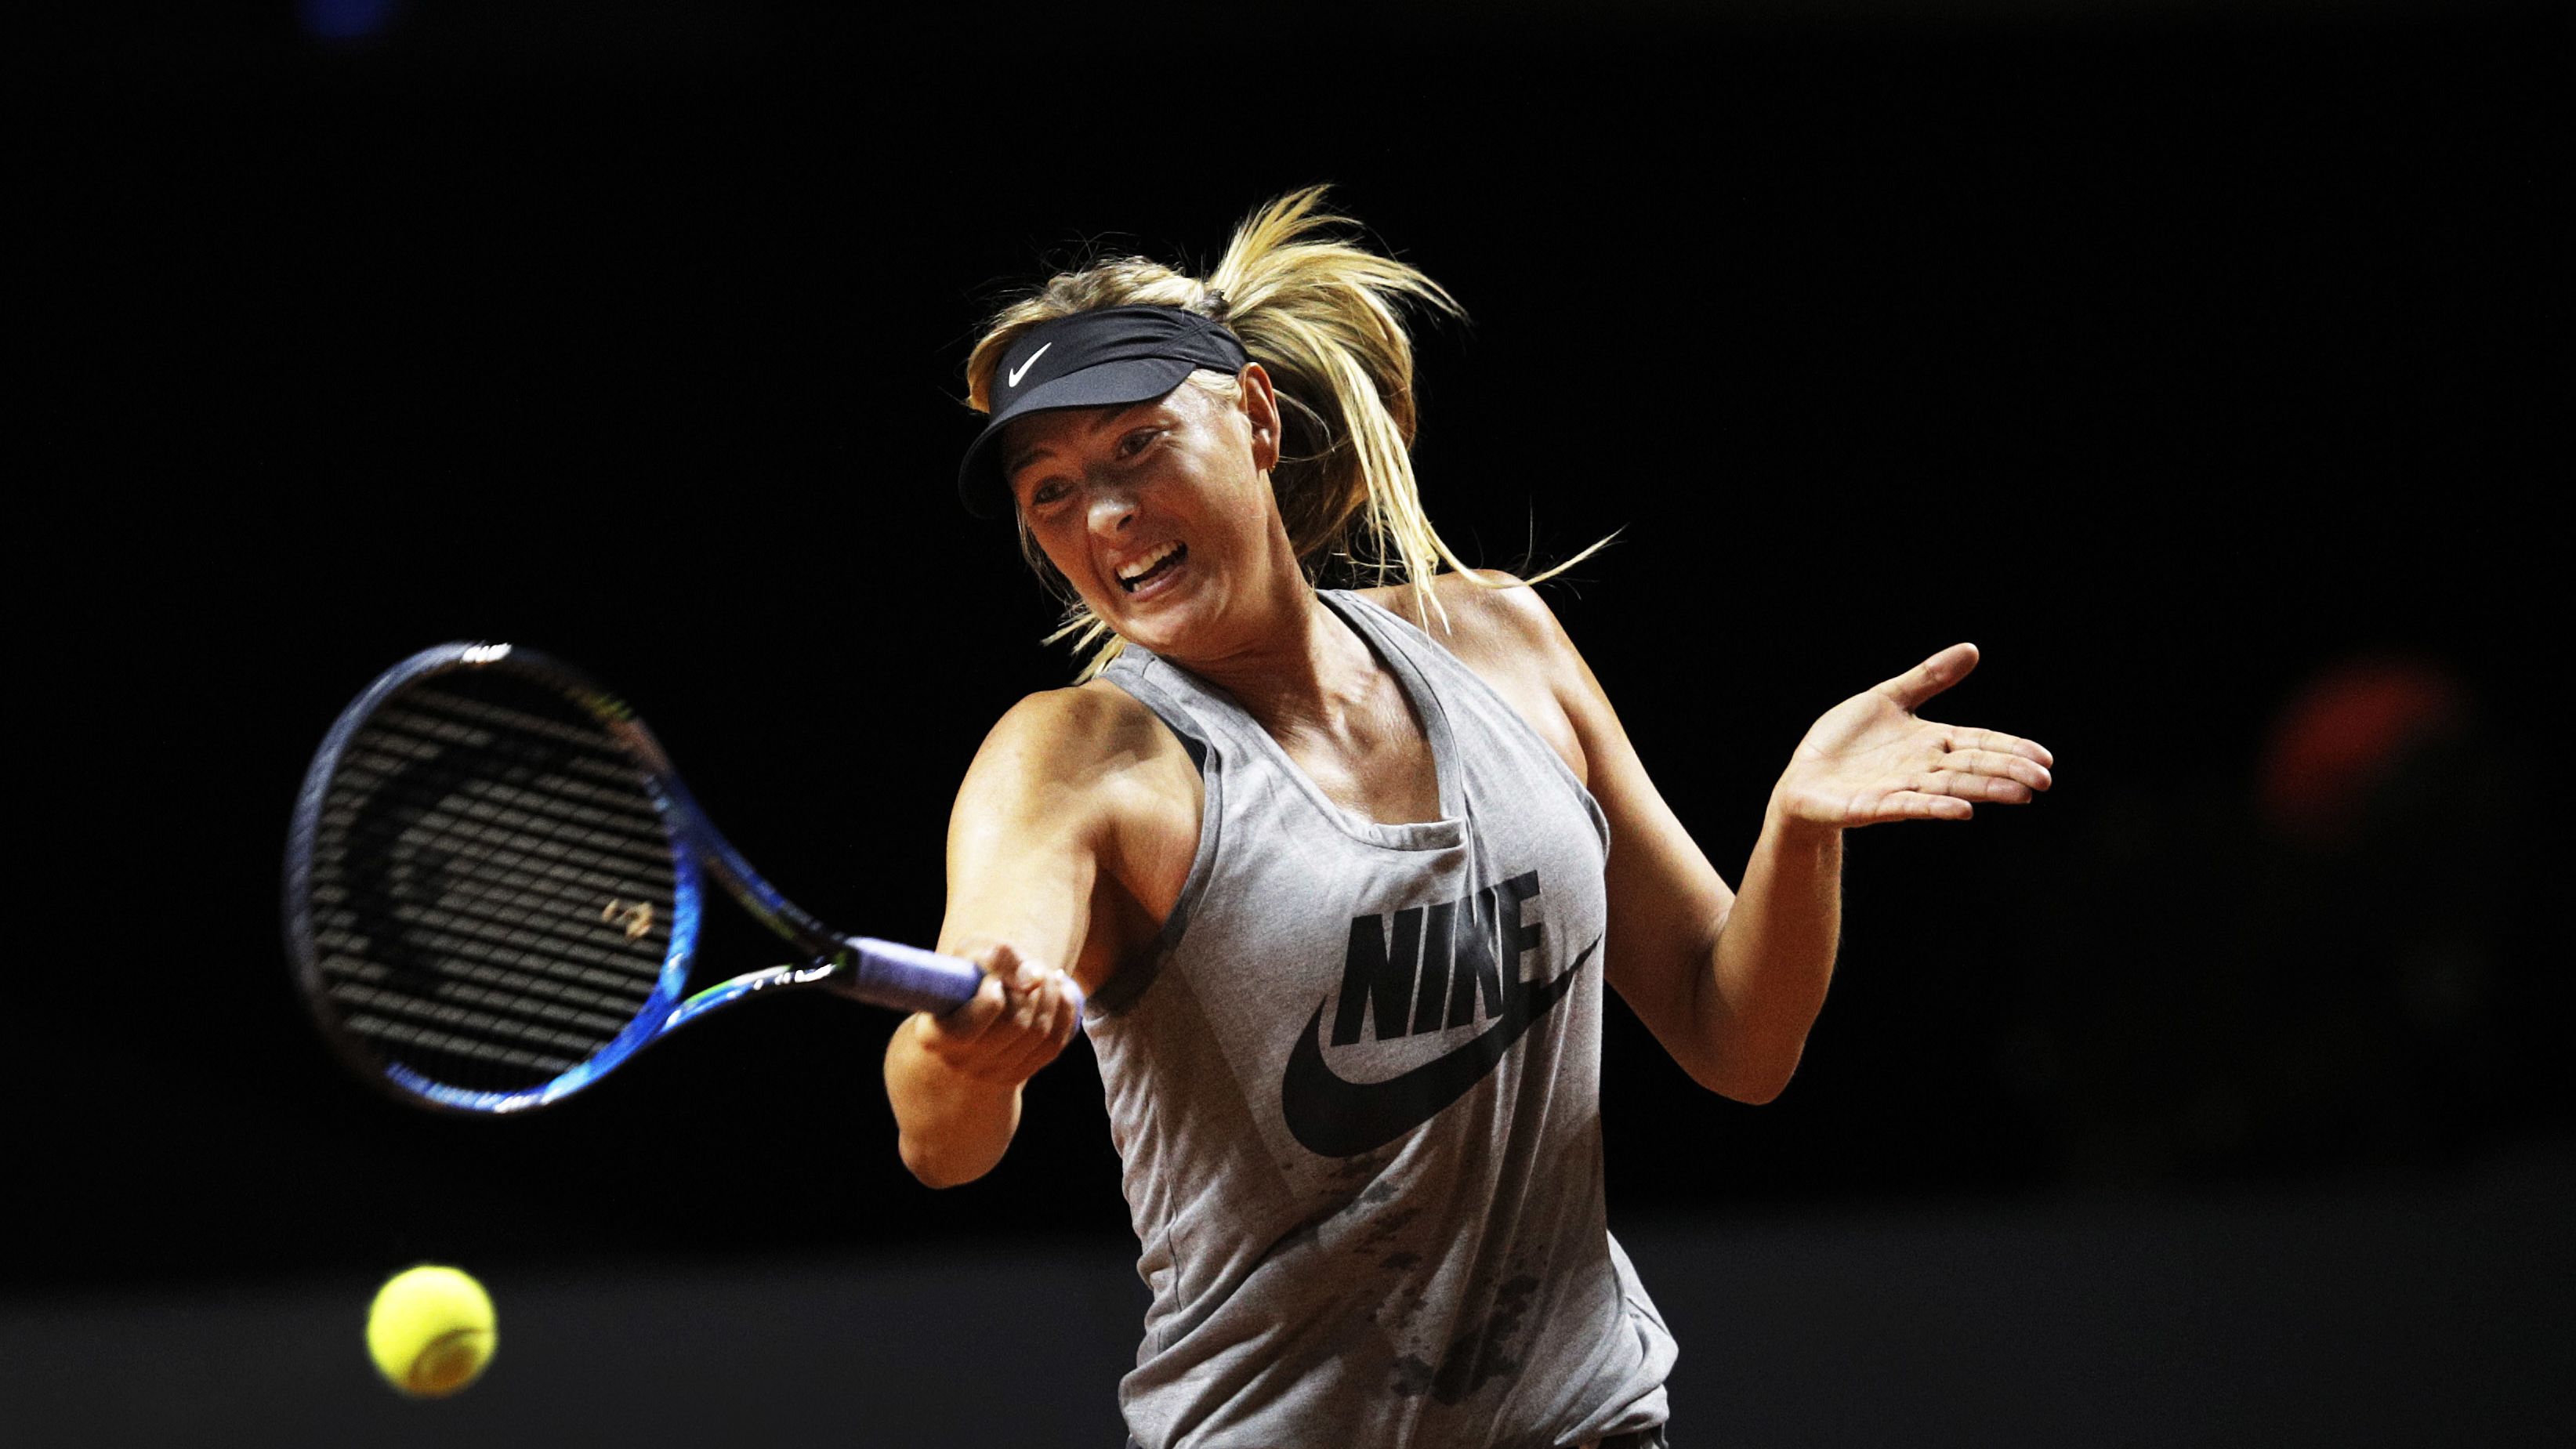 Sharapova training before her match against Vinci of Italy during the Porsche Tennis Grand Prix at Porsche Arena on Wednesday in Stuttgart, Germany.